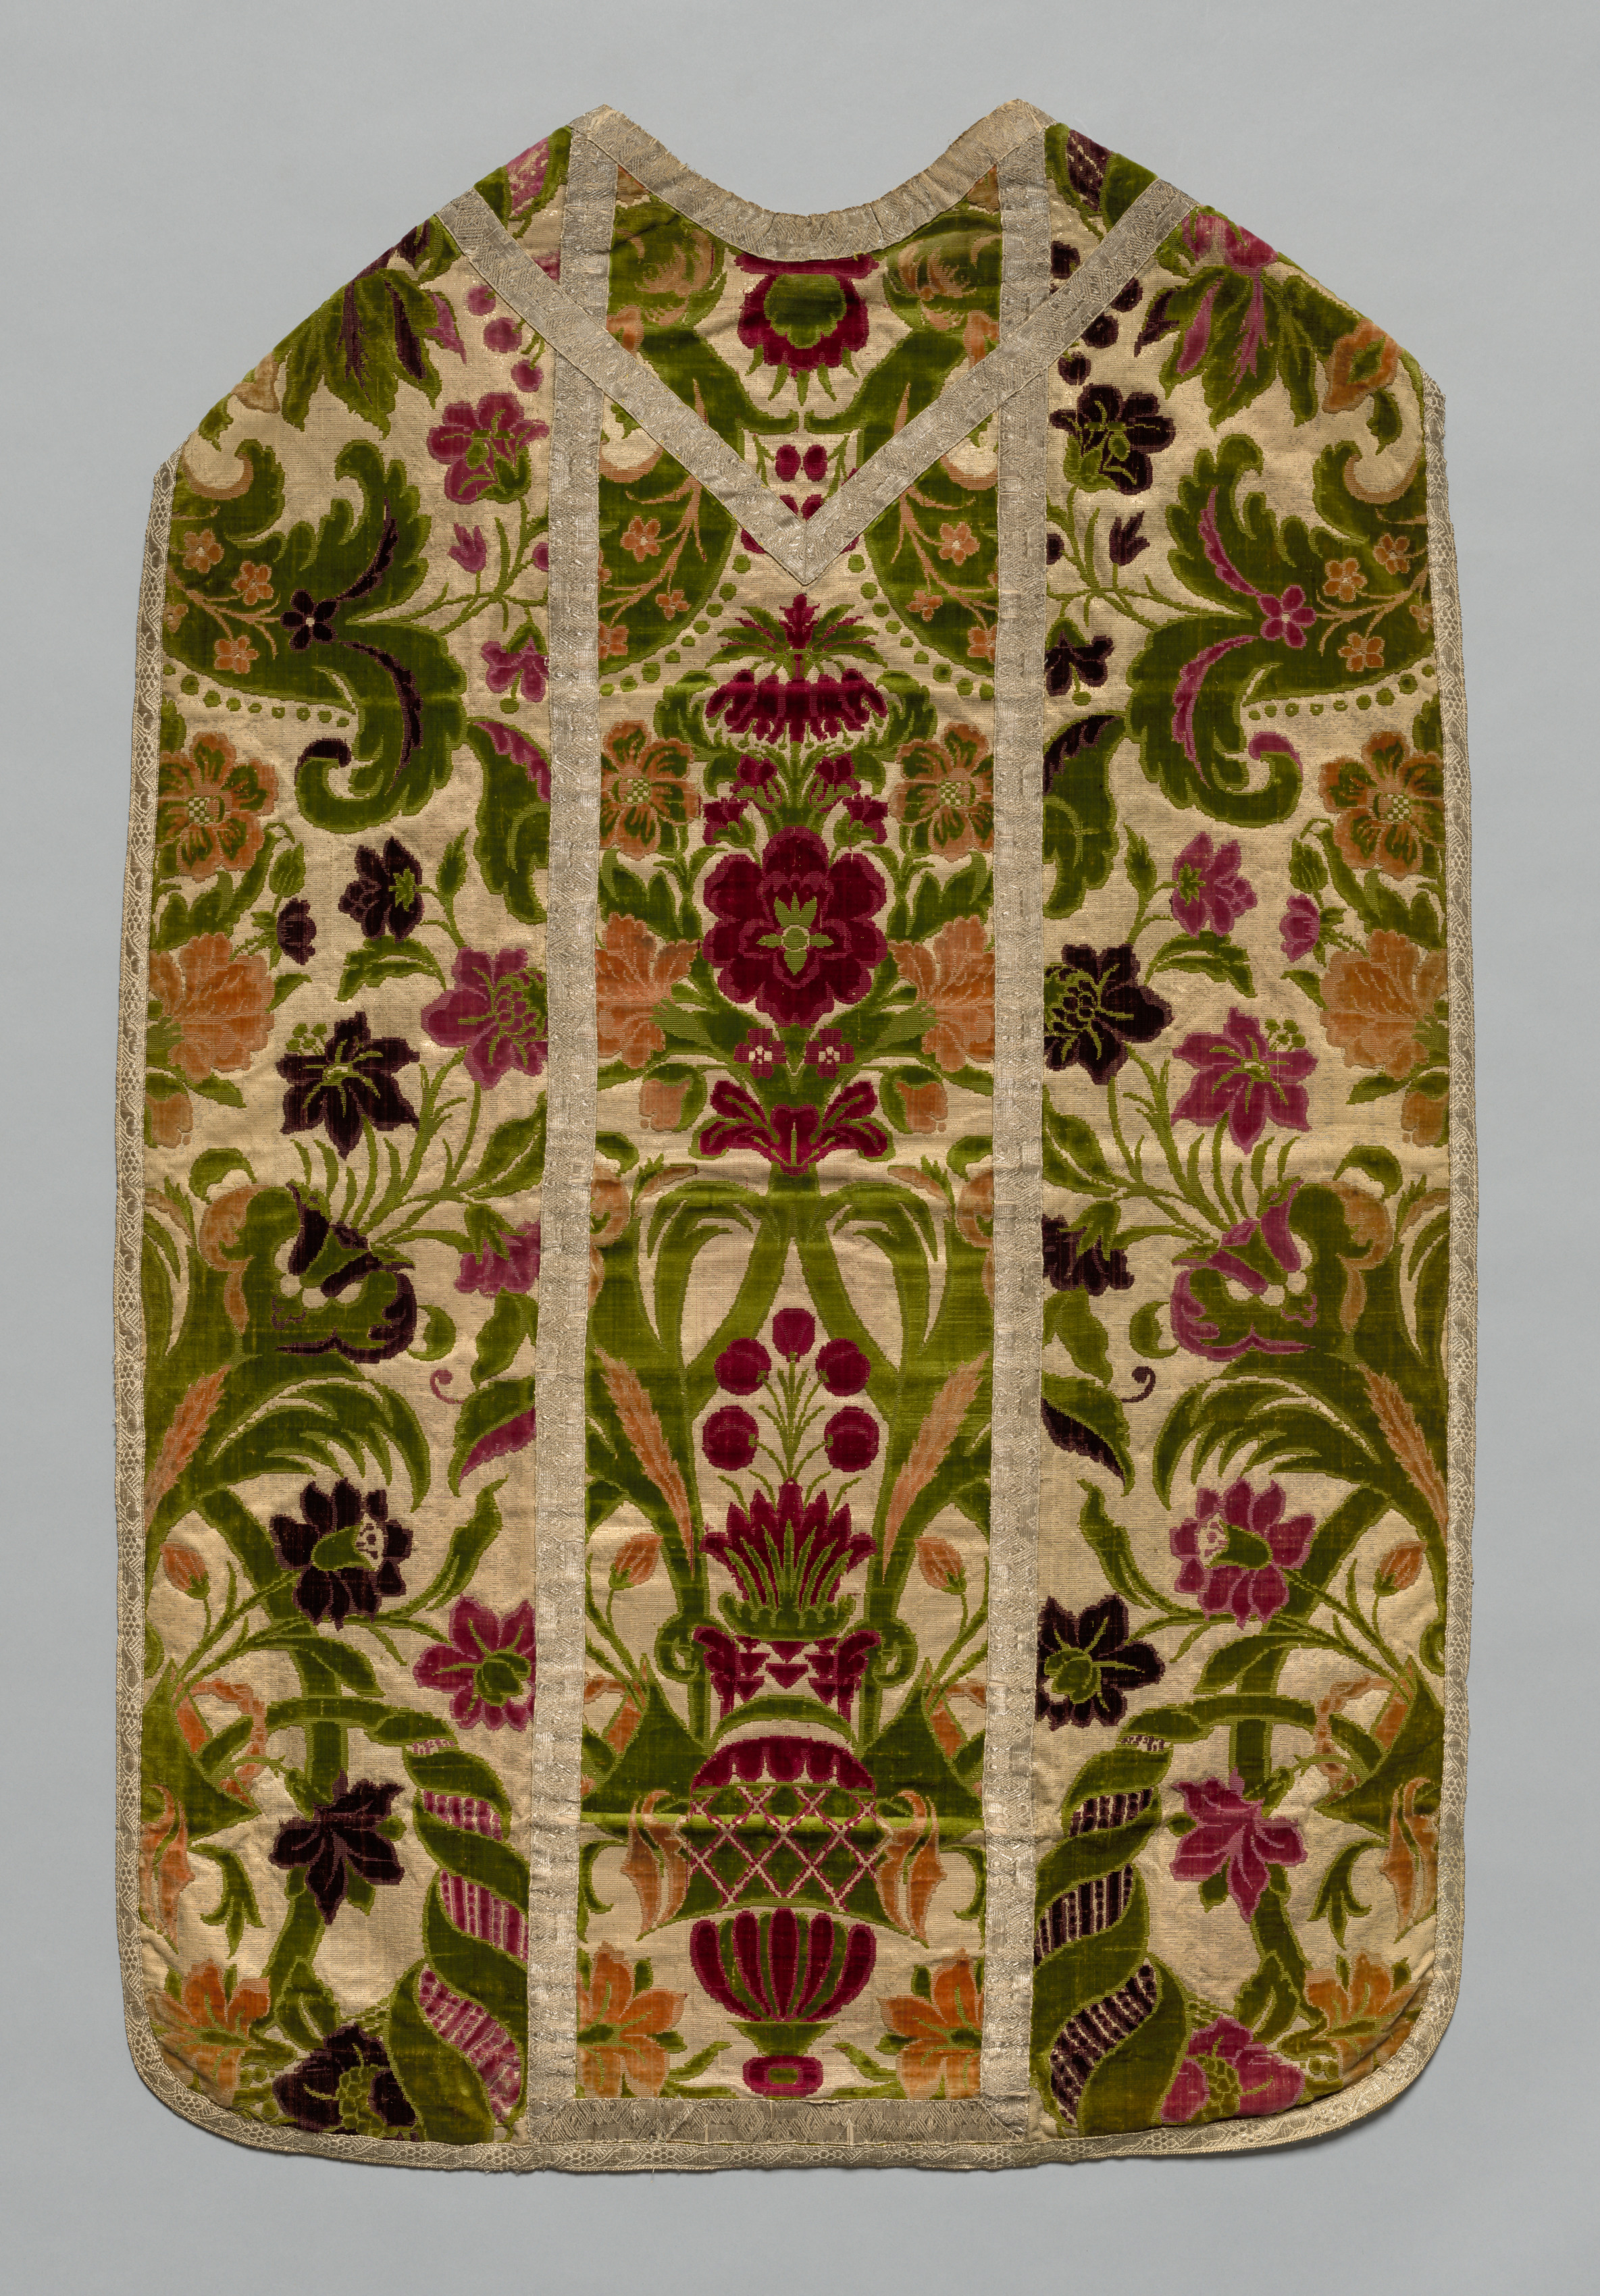 Chasuble, Stole, Burse (Corporal Case), and Maniple